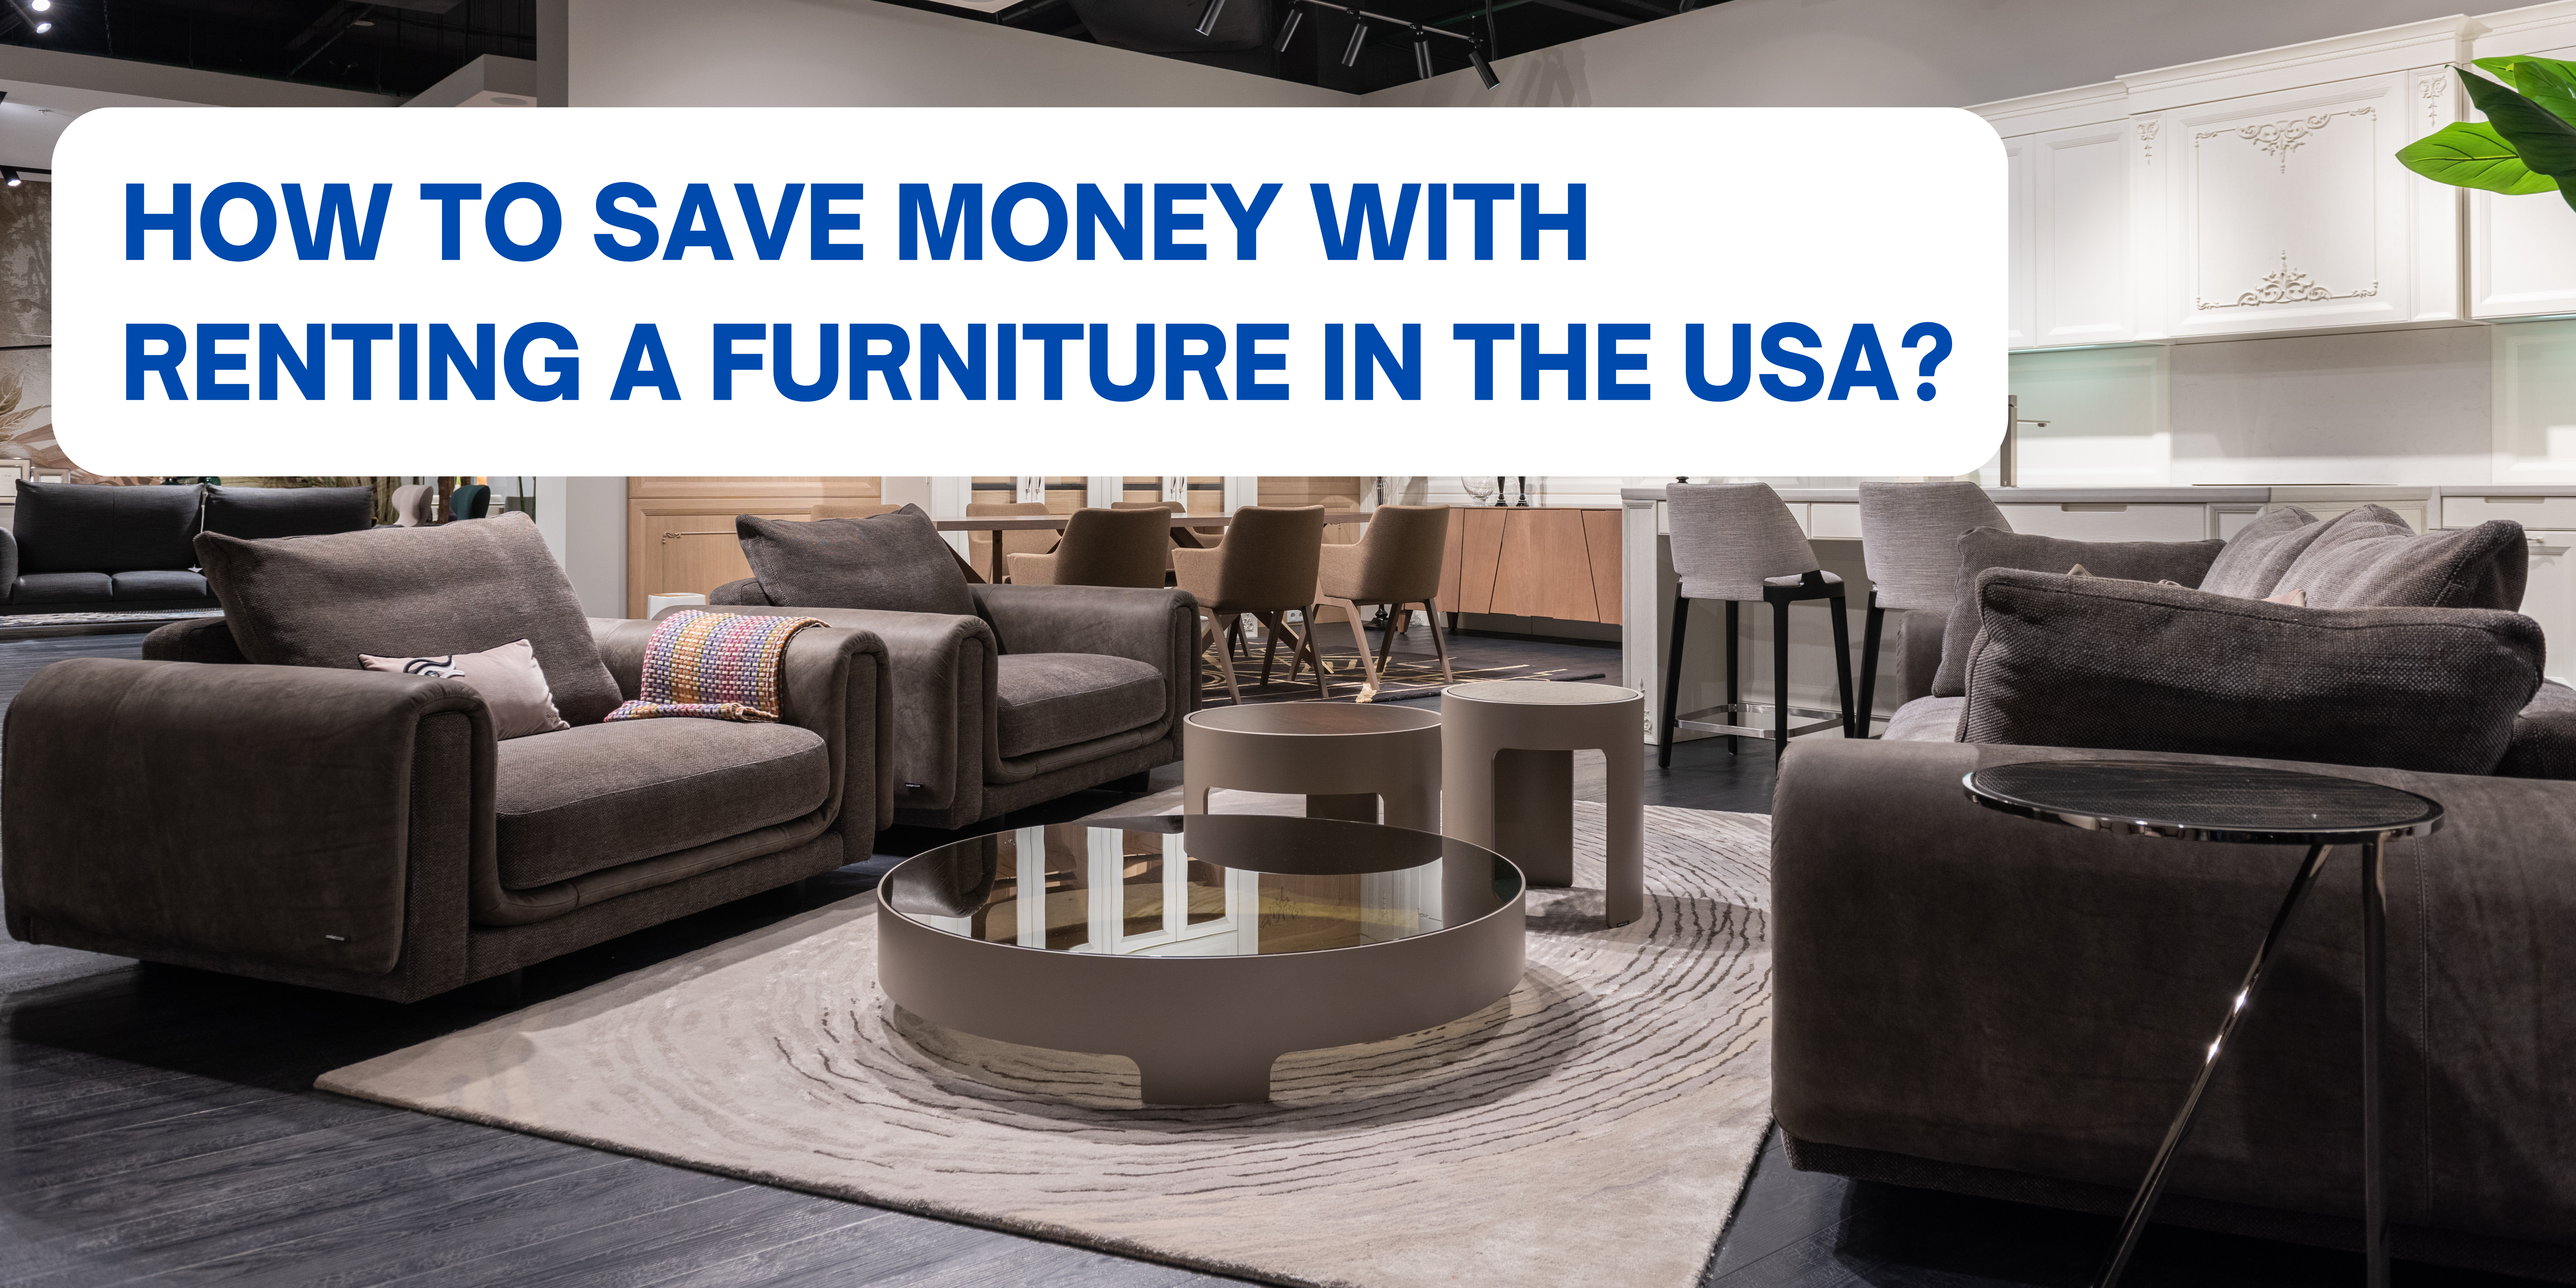 How to Save Money with Renting a Furniture in the USA?